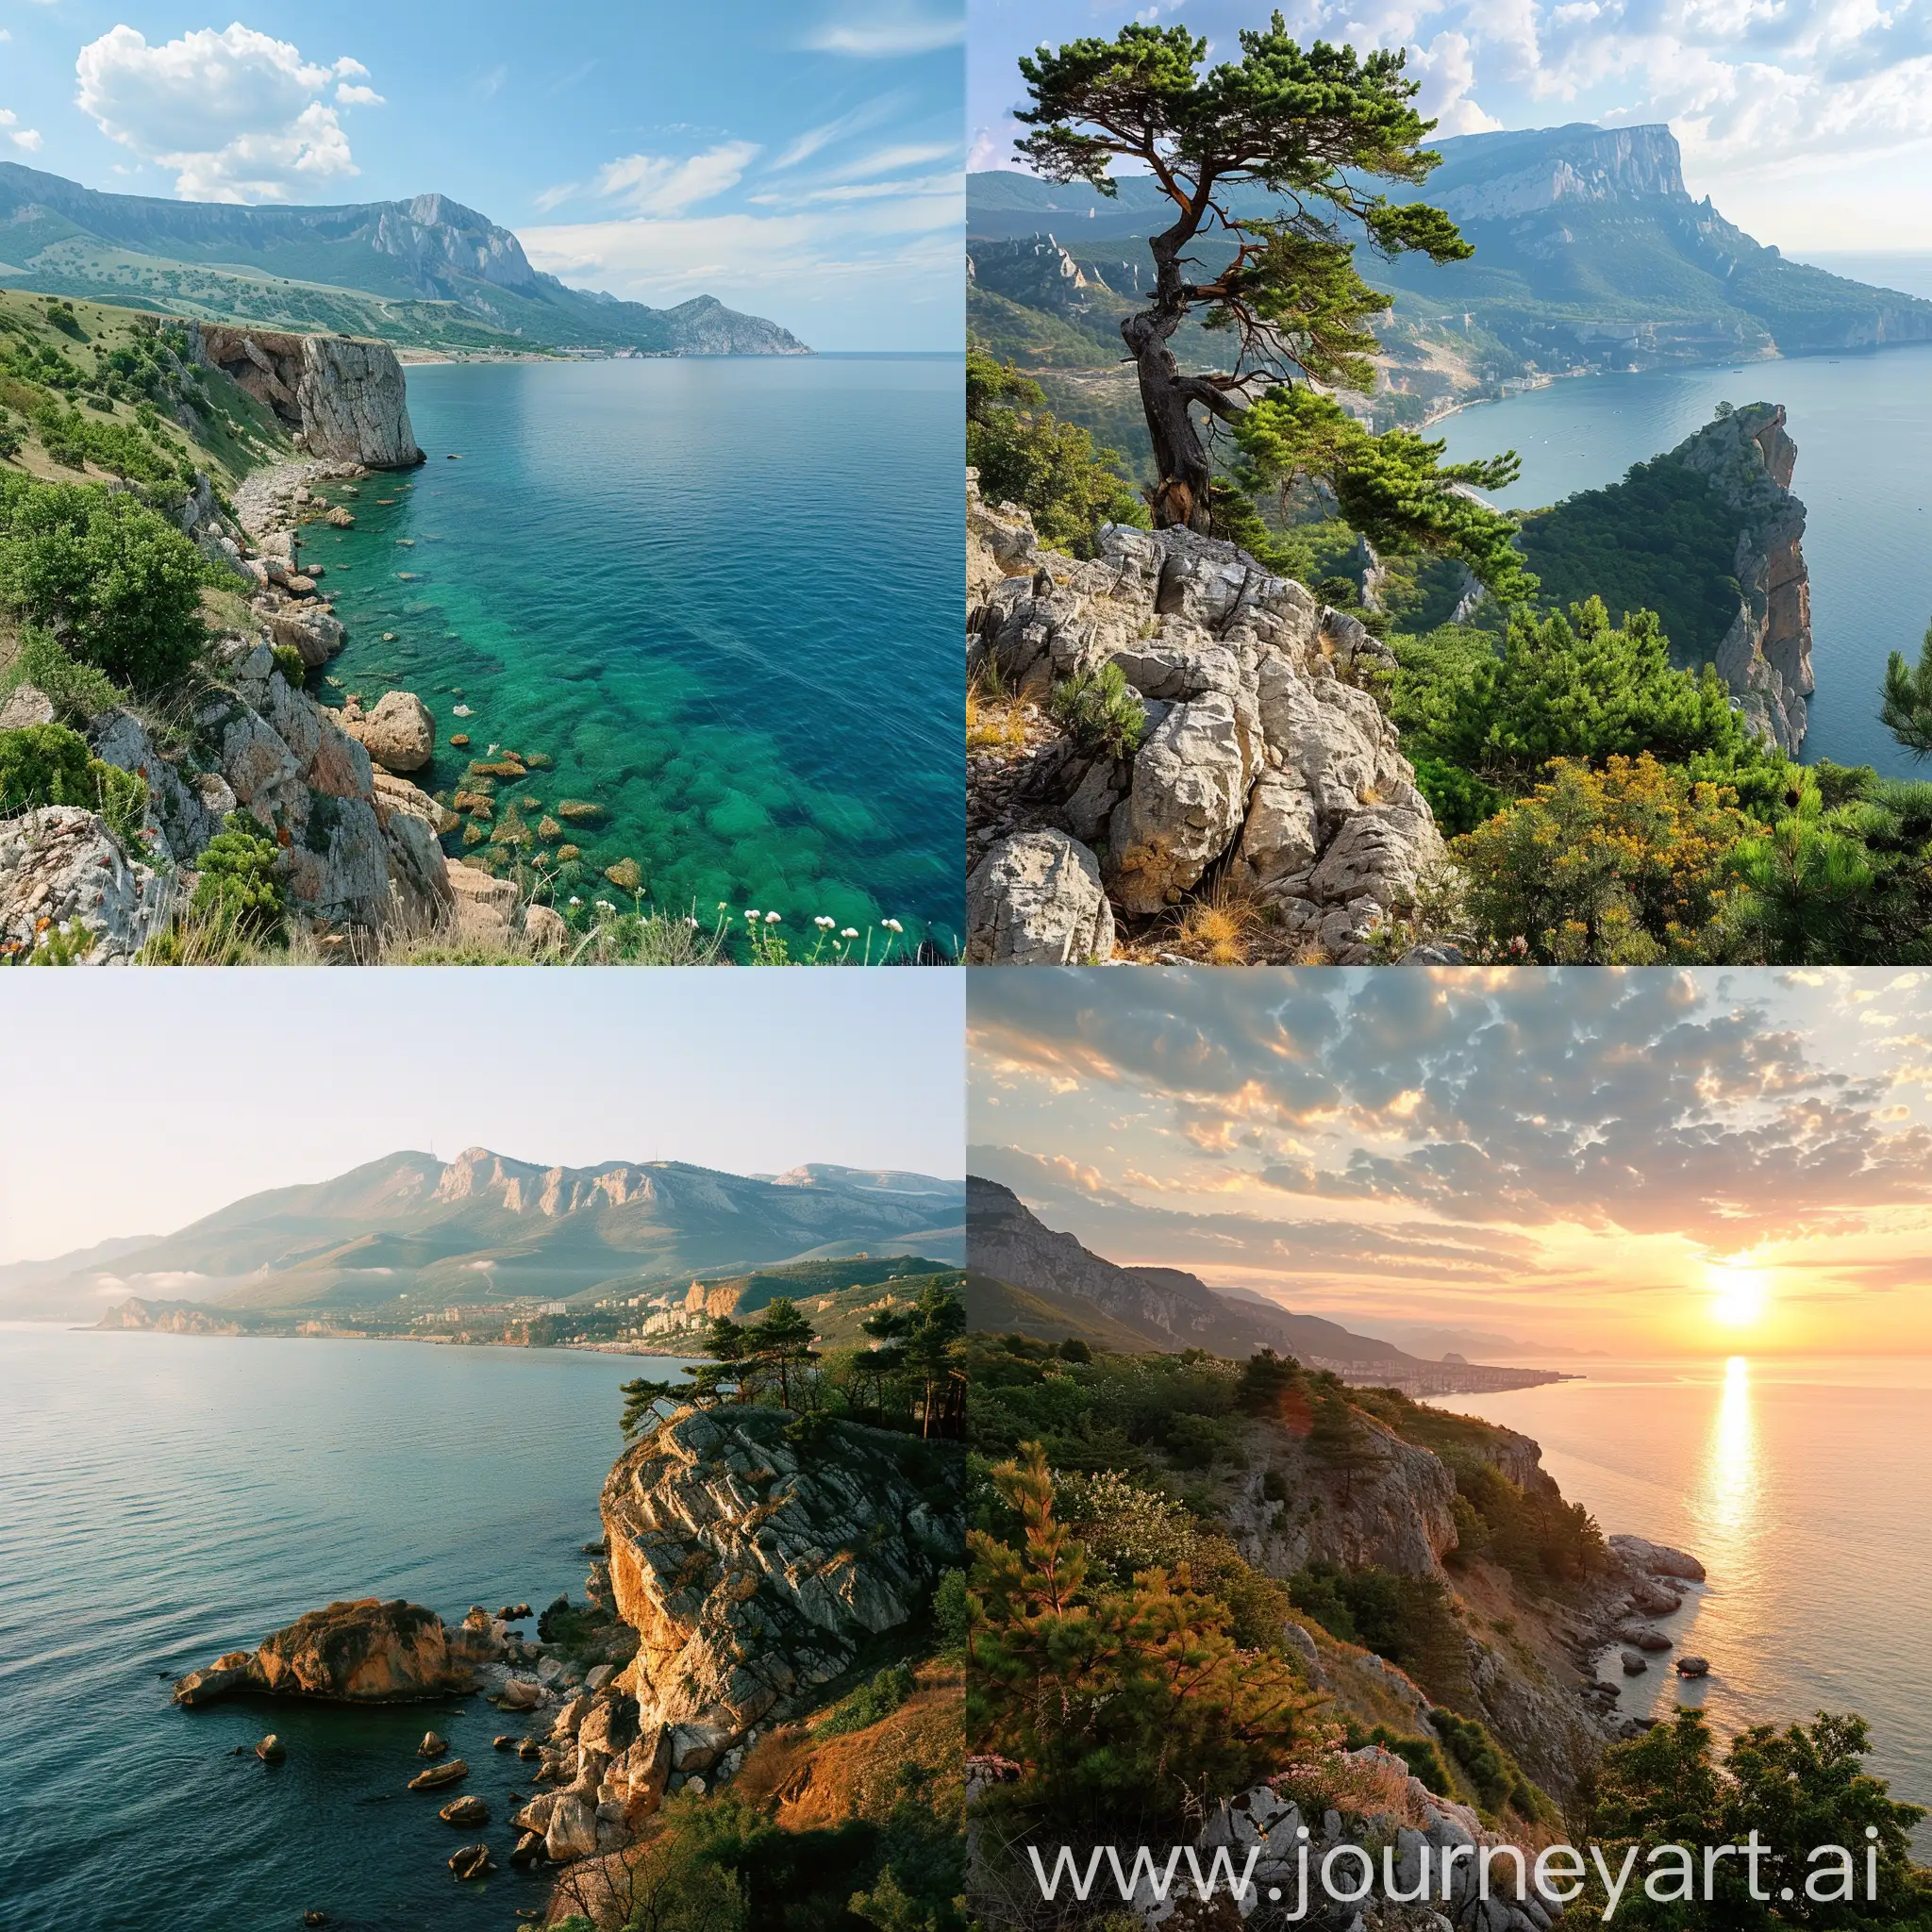 Scenic-Views-of-Crimea-Capturing-the-Natural-Beauty-in-a-Square-Frame